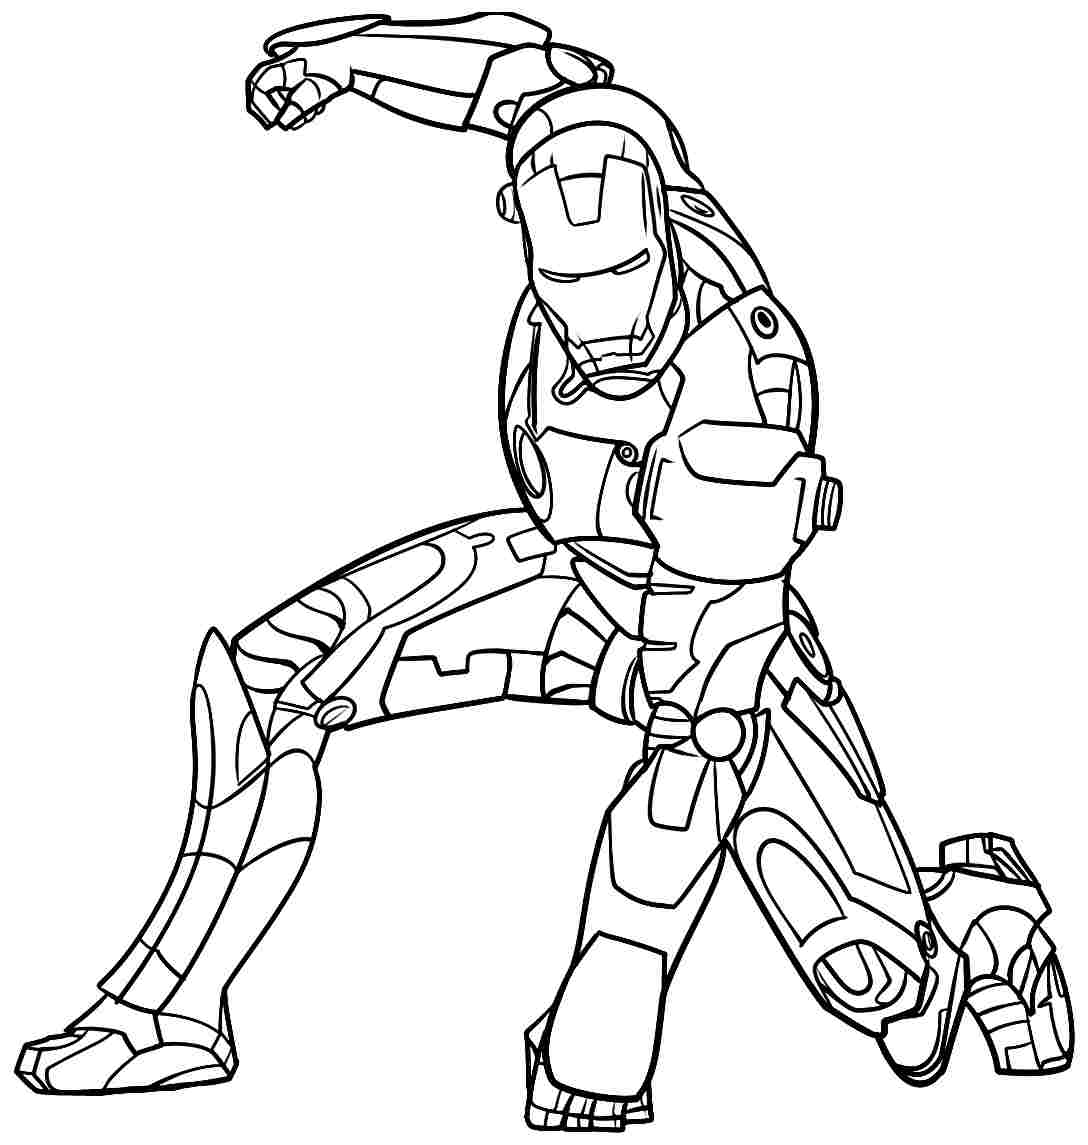 Ironman Coloring Pages   Only Coloring Pages   Coloring Home